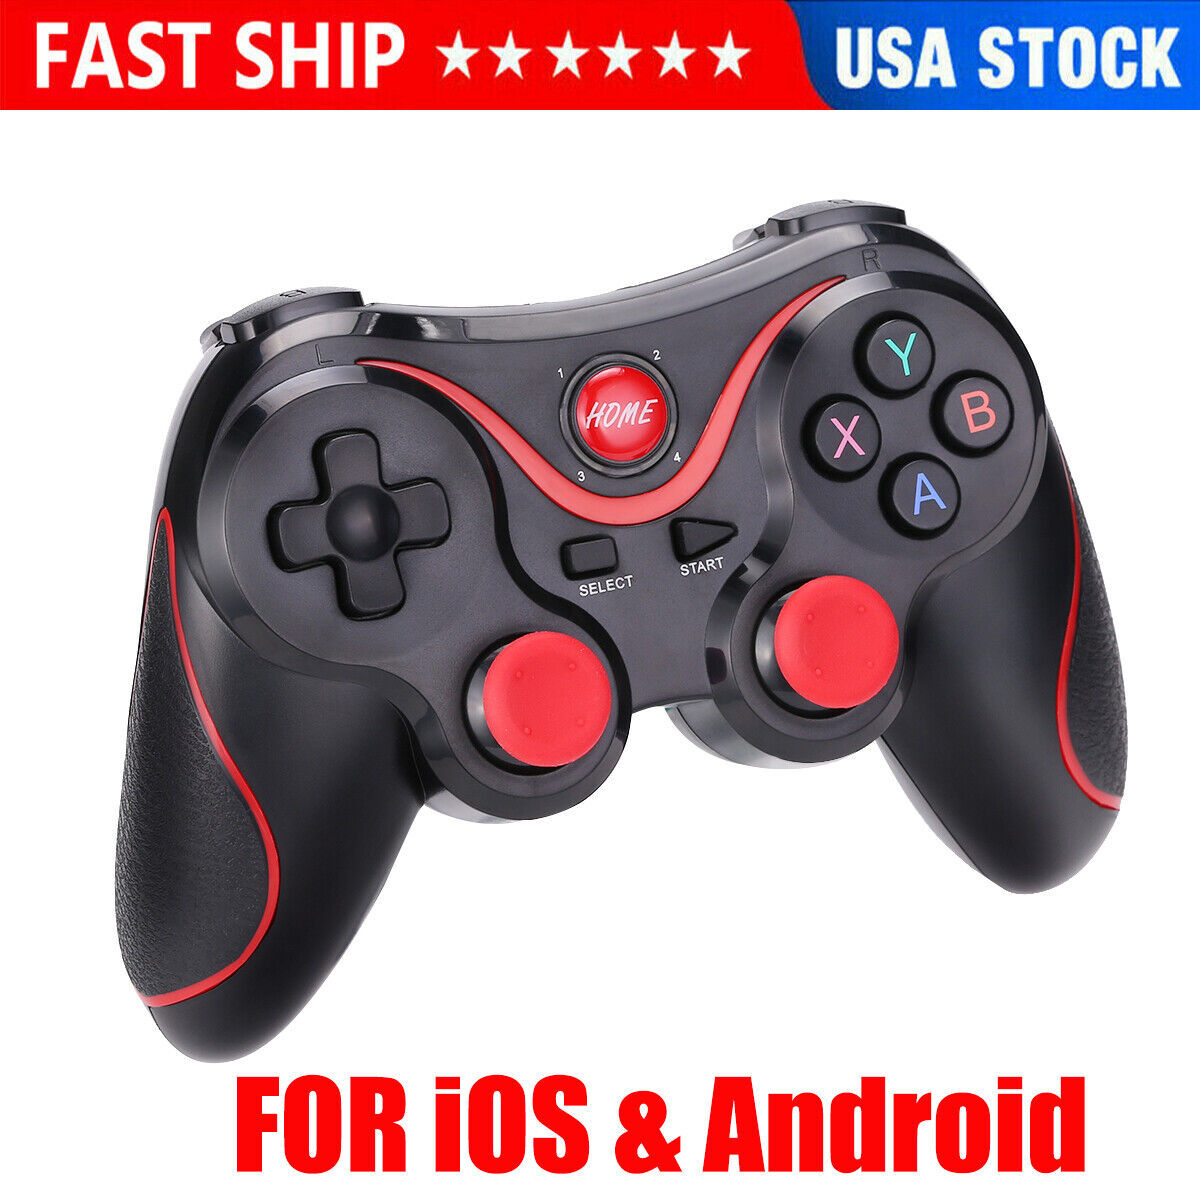 Bluetooth Wireless Controller Game Pad For Android & Ios Amazon Fire Tv Stick - $25.65